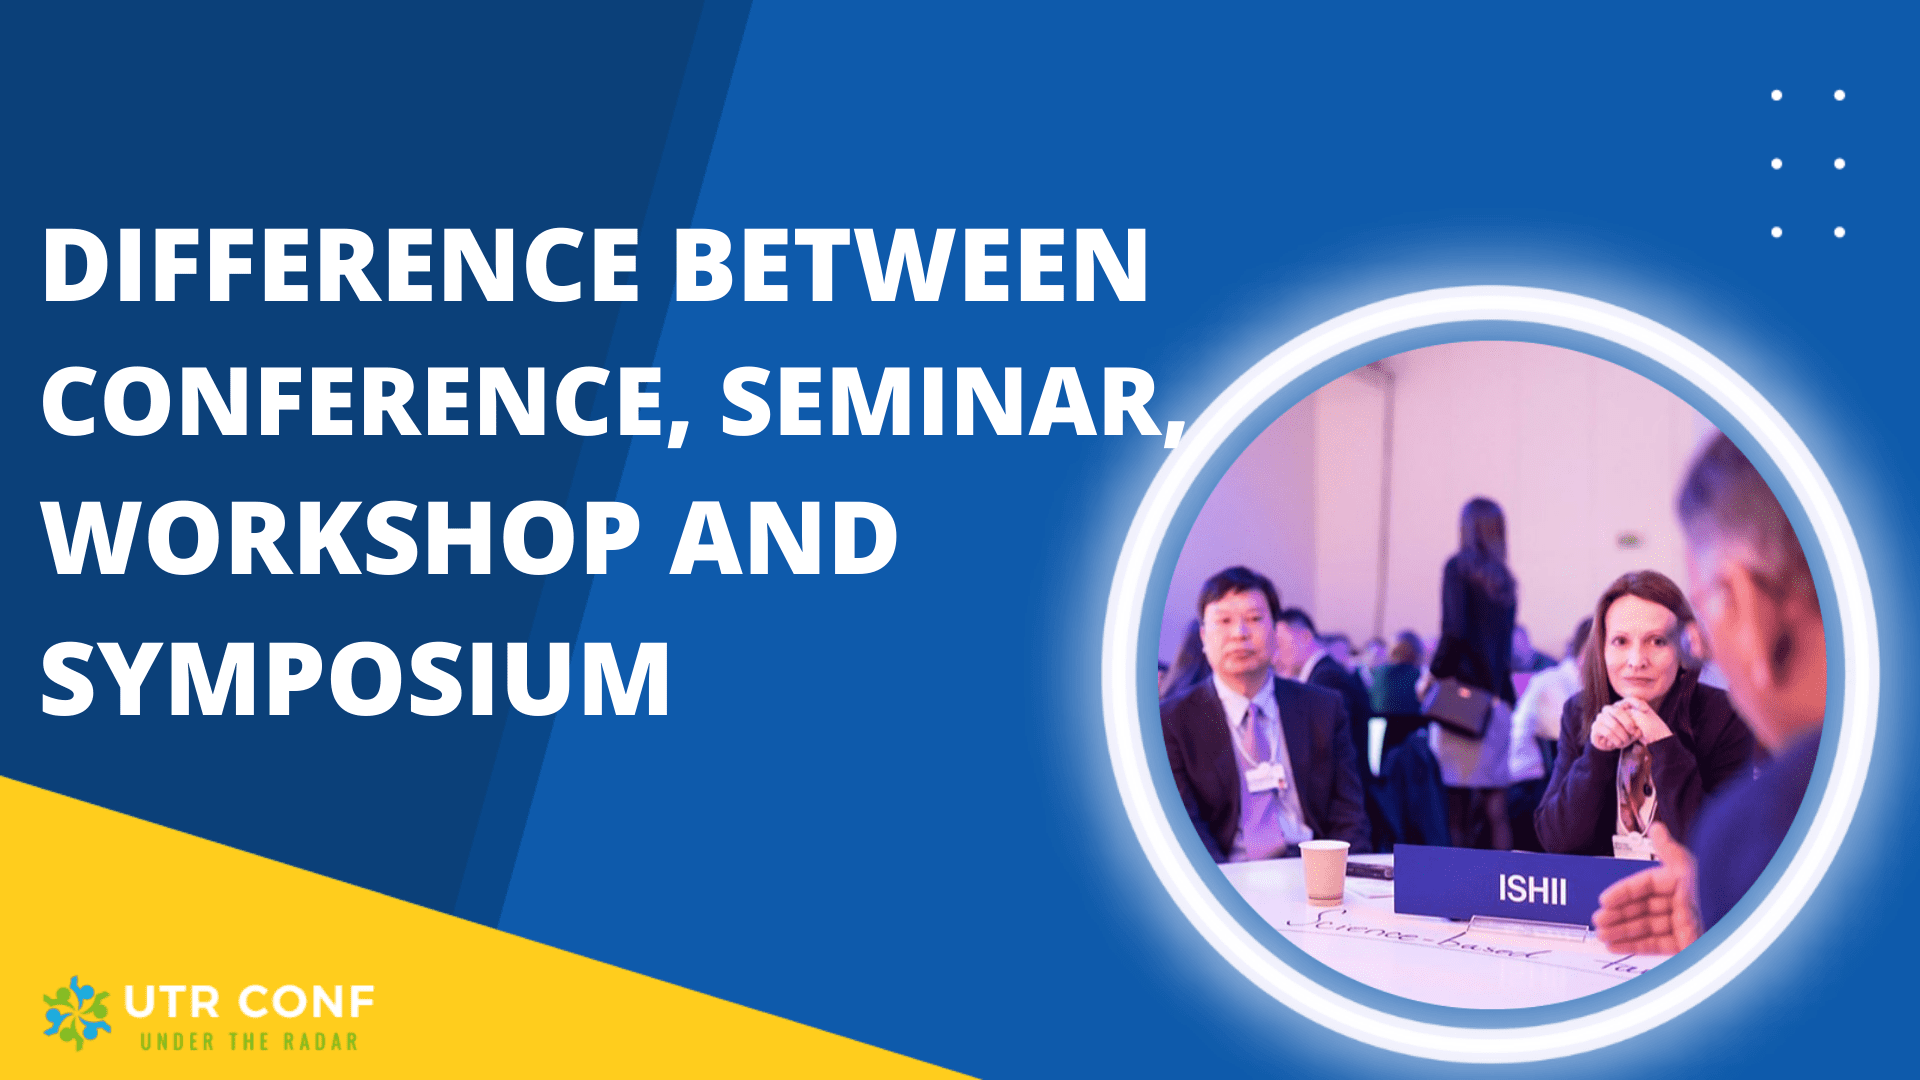 Difference between Conference, Seminar, and Symposium?